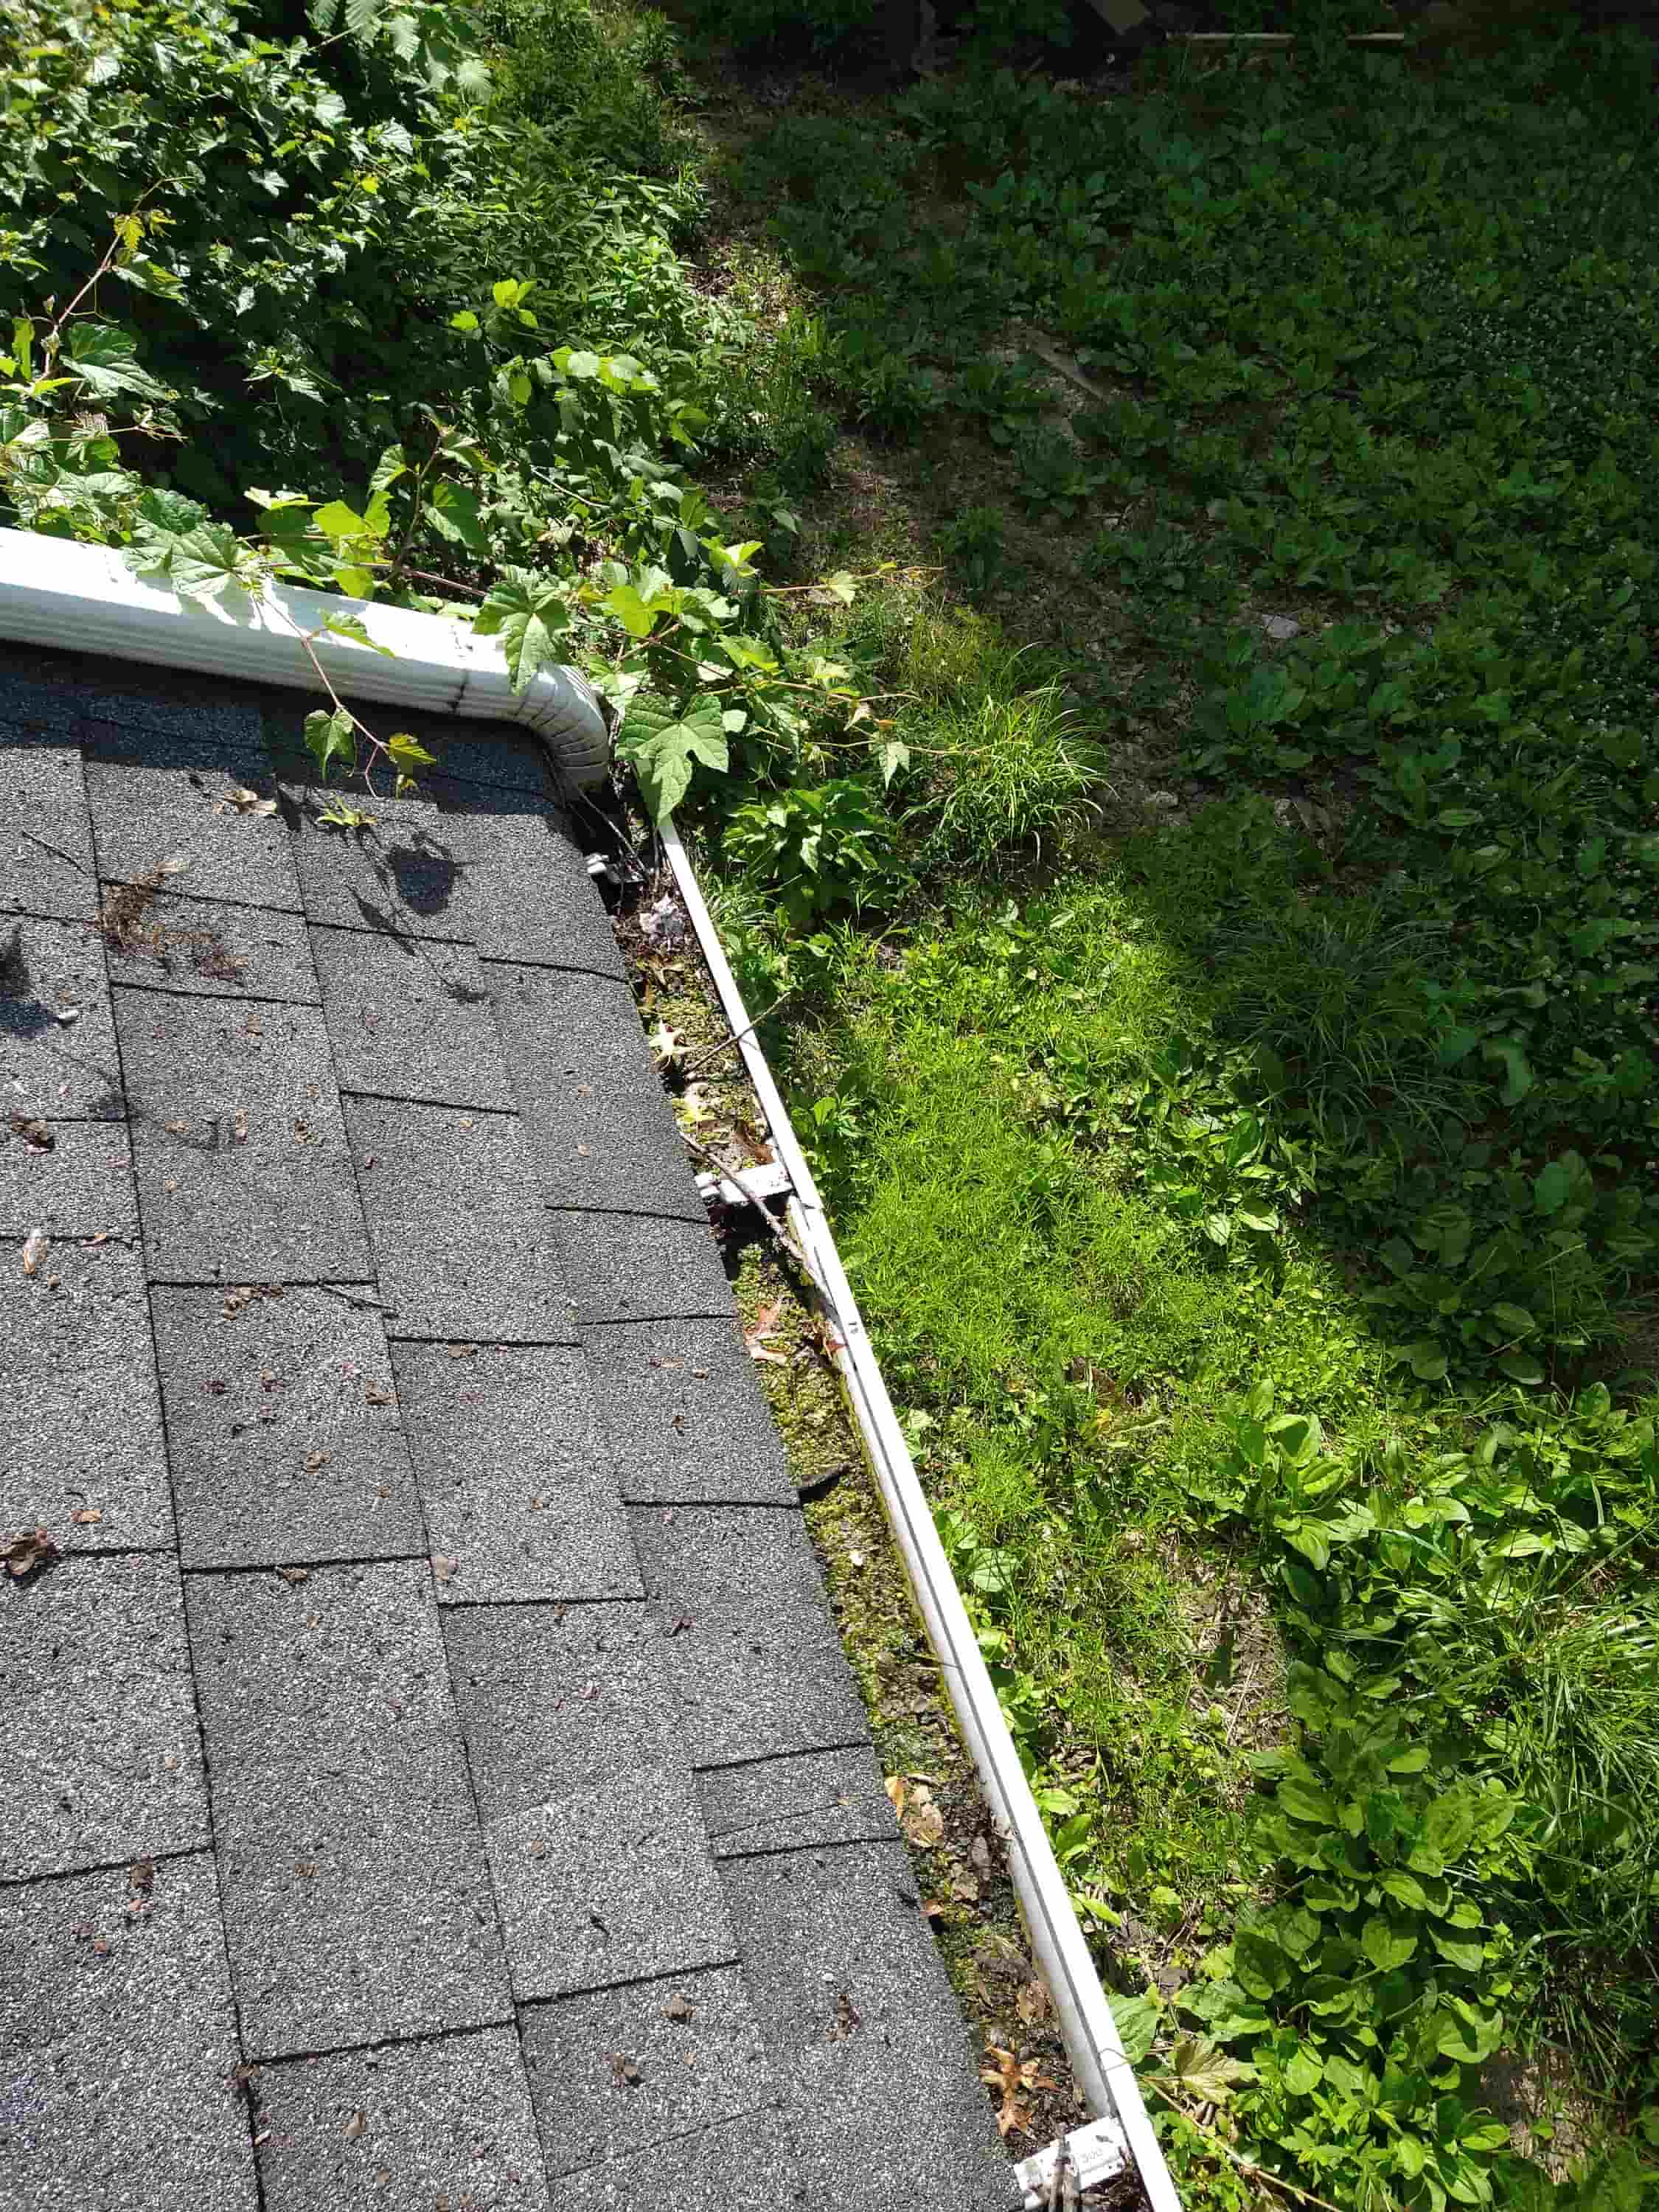 gutter cleaning how to